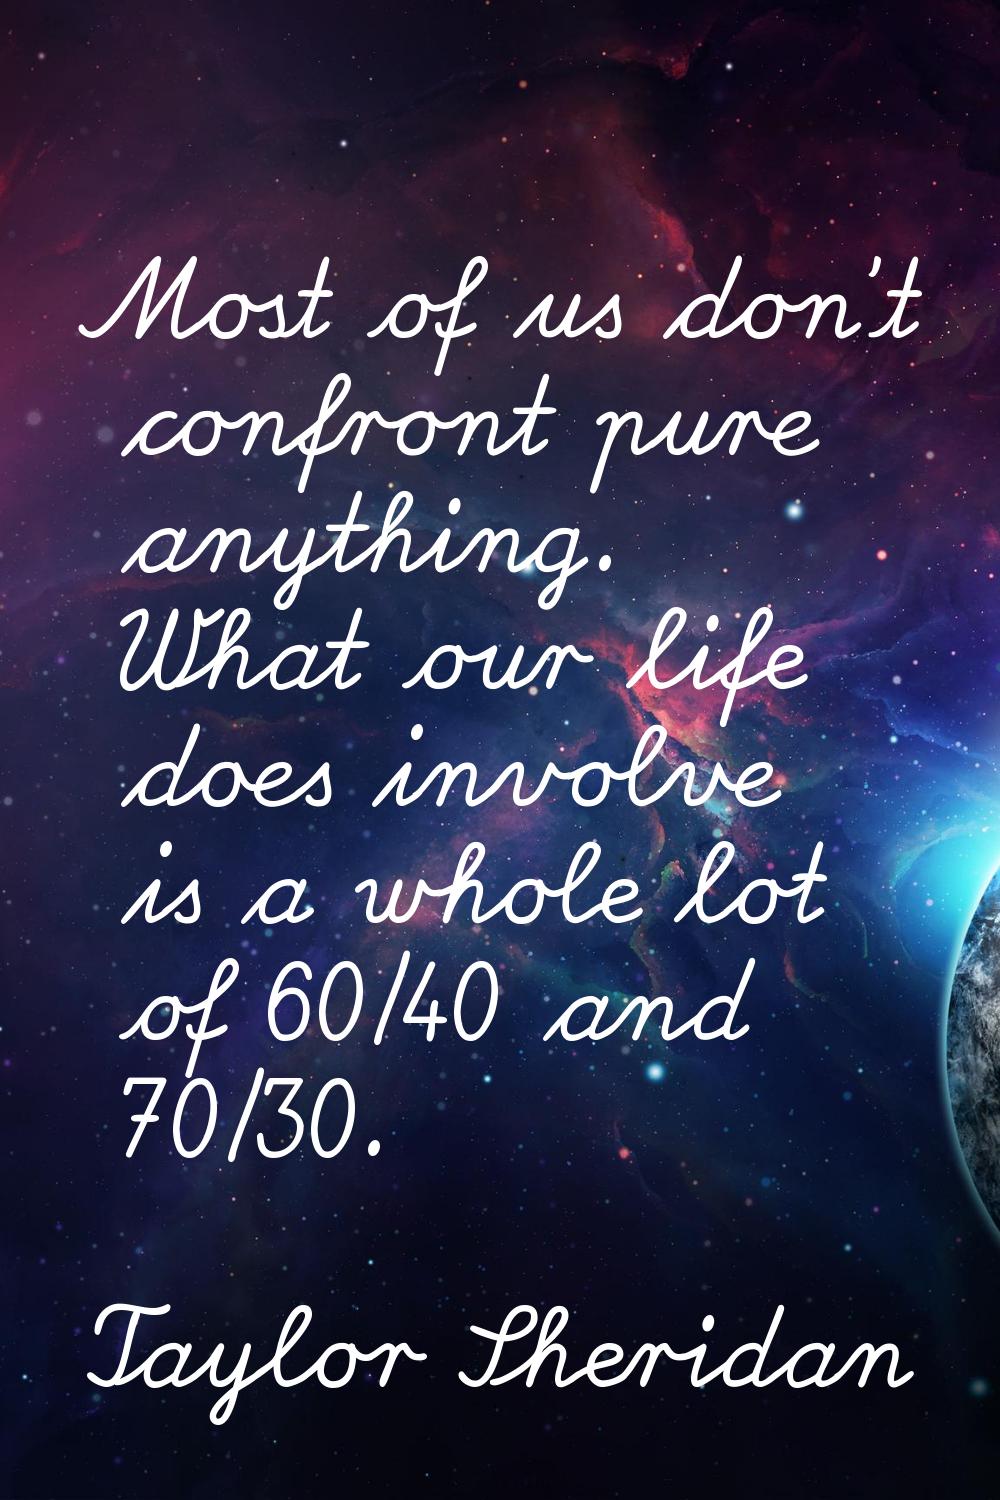 Most of us don't confront pure anything. What our life does involve is a whole lot of 60/40 and 70/